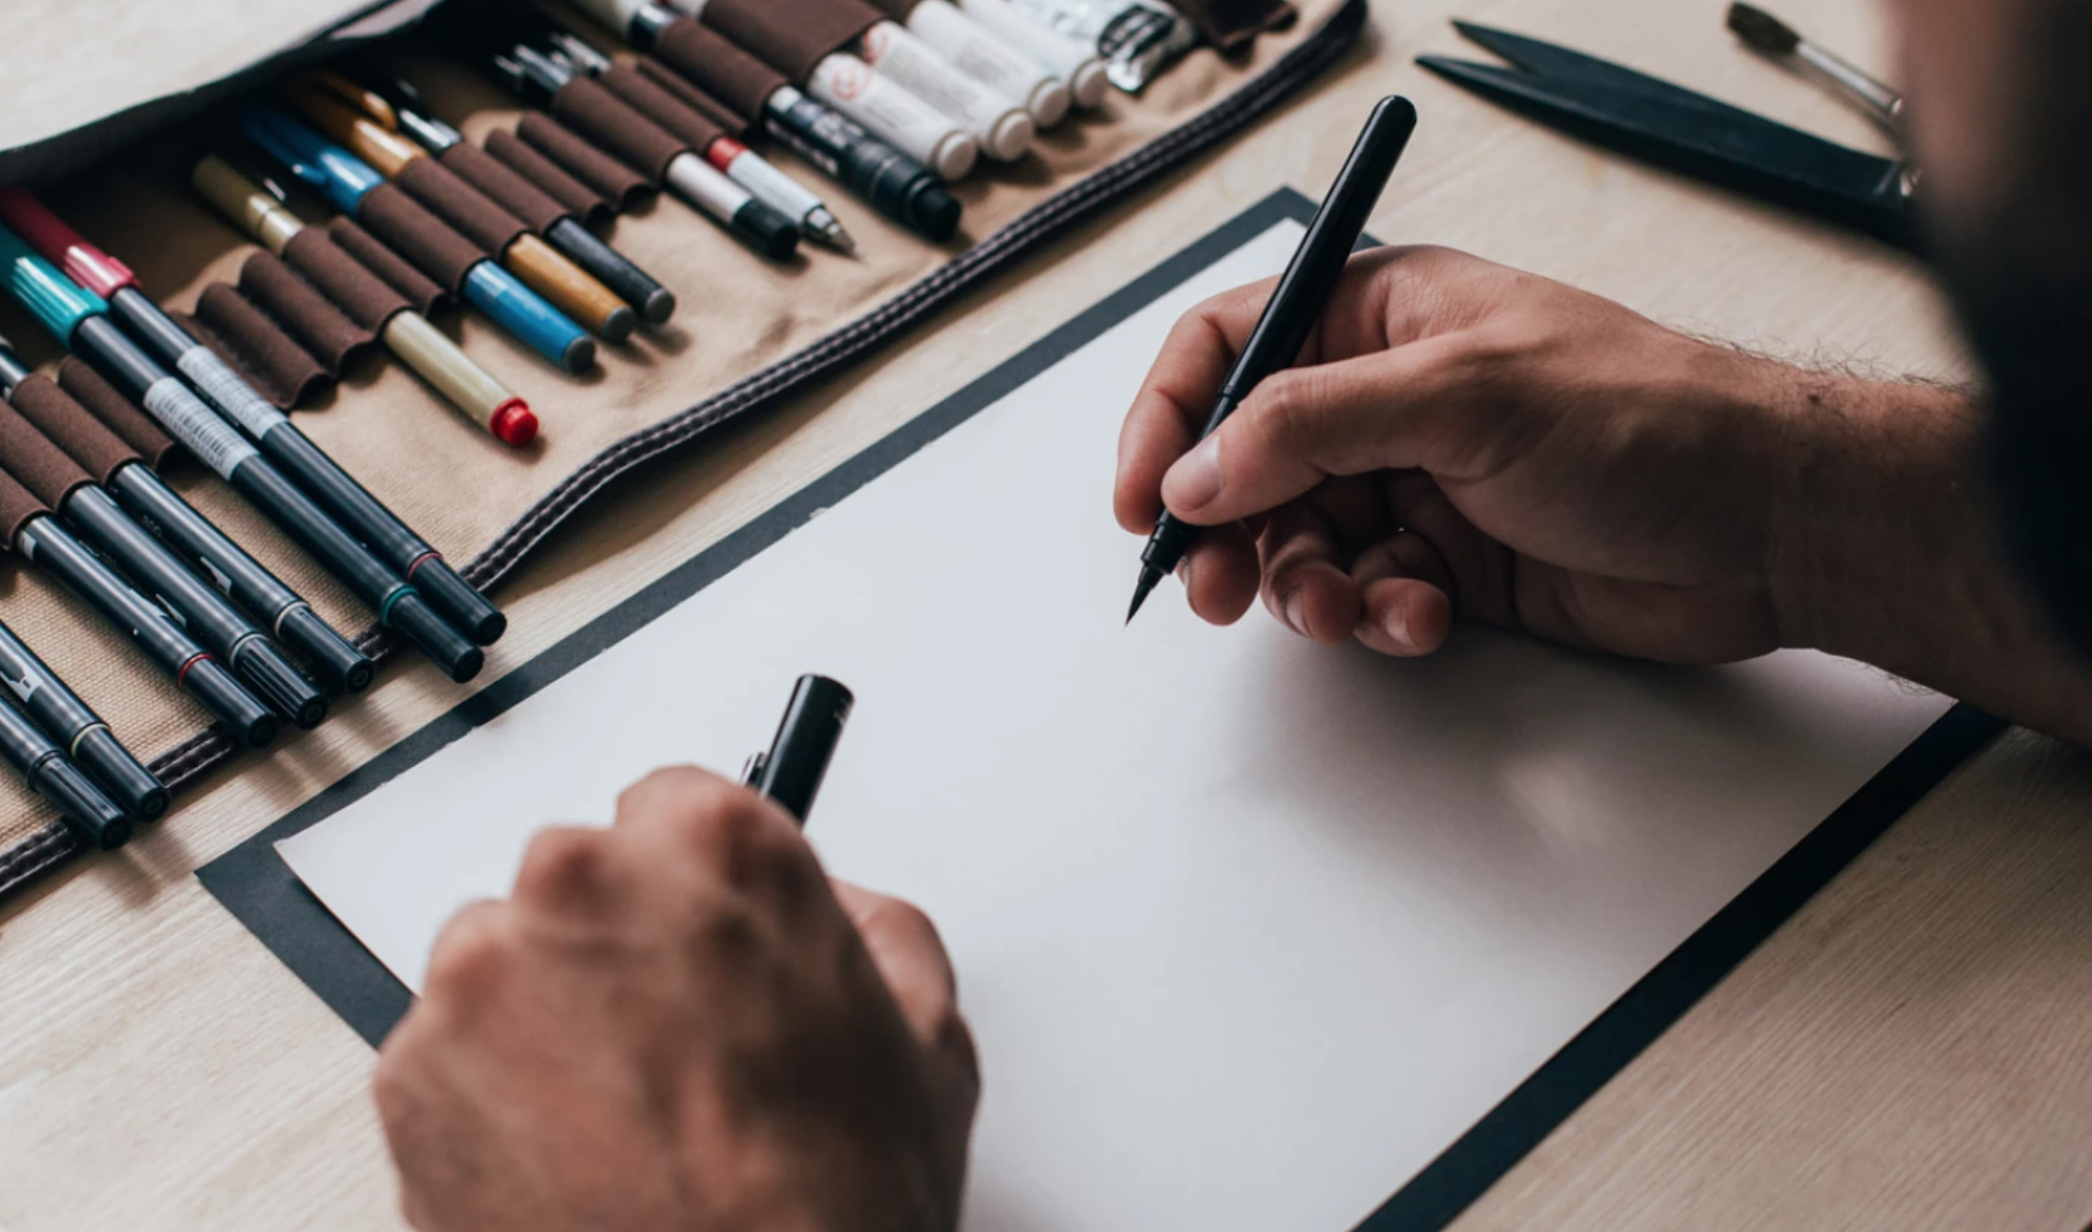 Choosing a Quality Brush Pen for Sketching and Painting